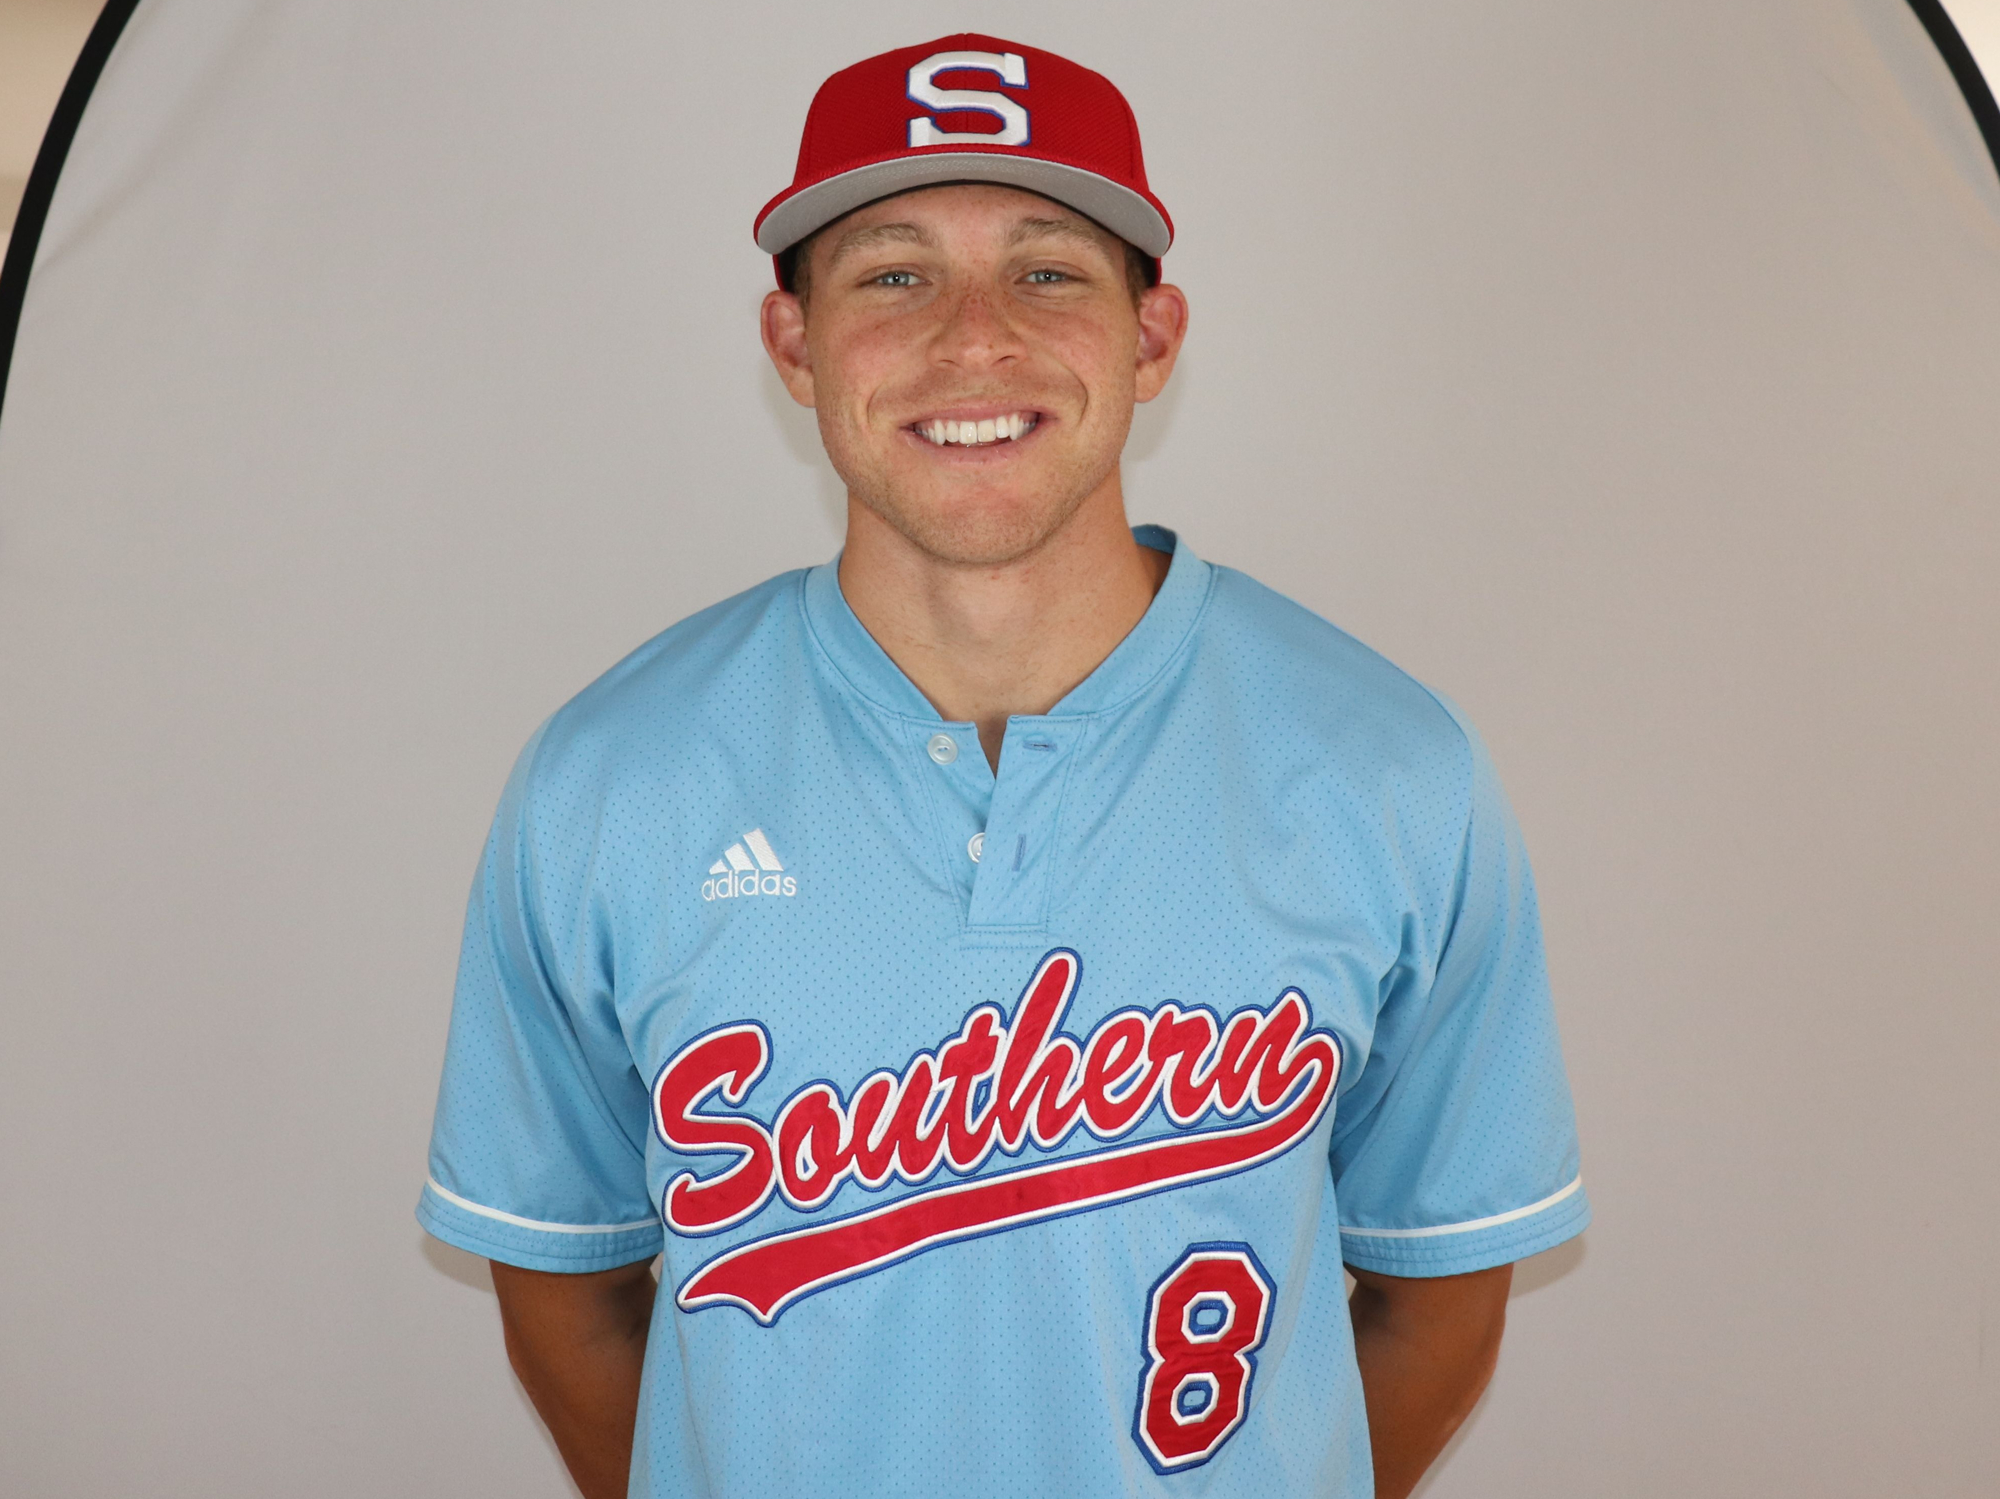 10. Sarasota High alumnus Vaun Brown was selected in the 10th round of the 2021 MLB Draft by the San Francisco Giants. Brown played at Florida Southern in college. Photo courtesy Florida Southern Athletic Communications.